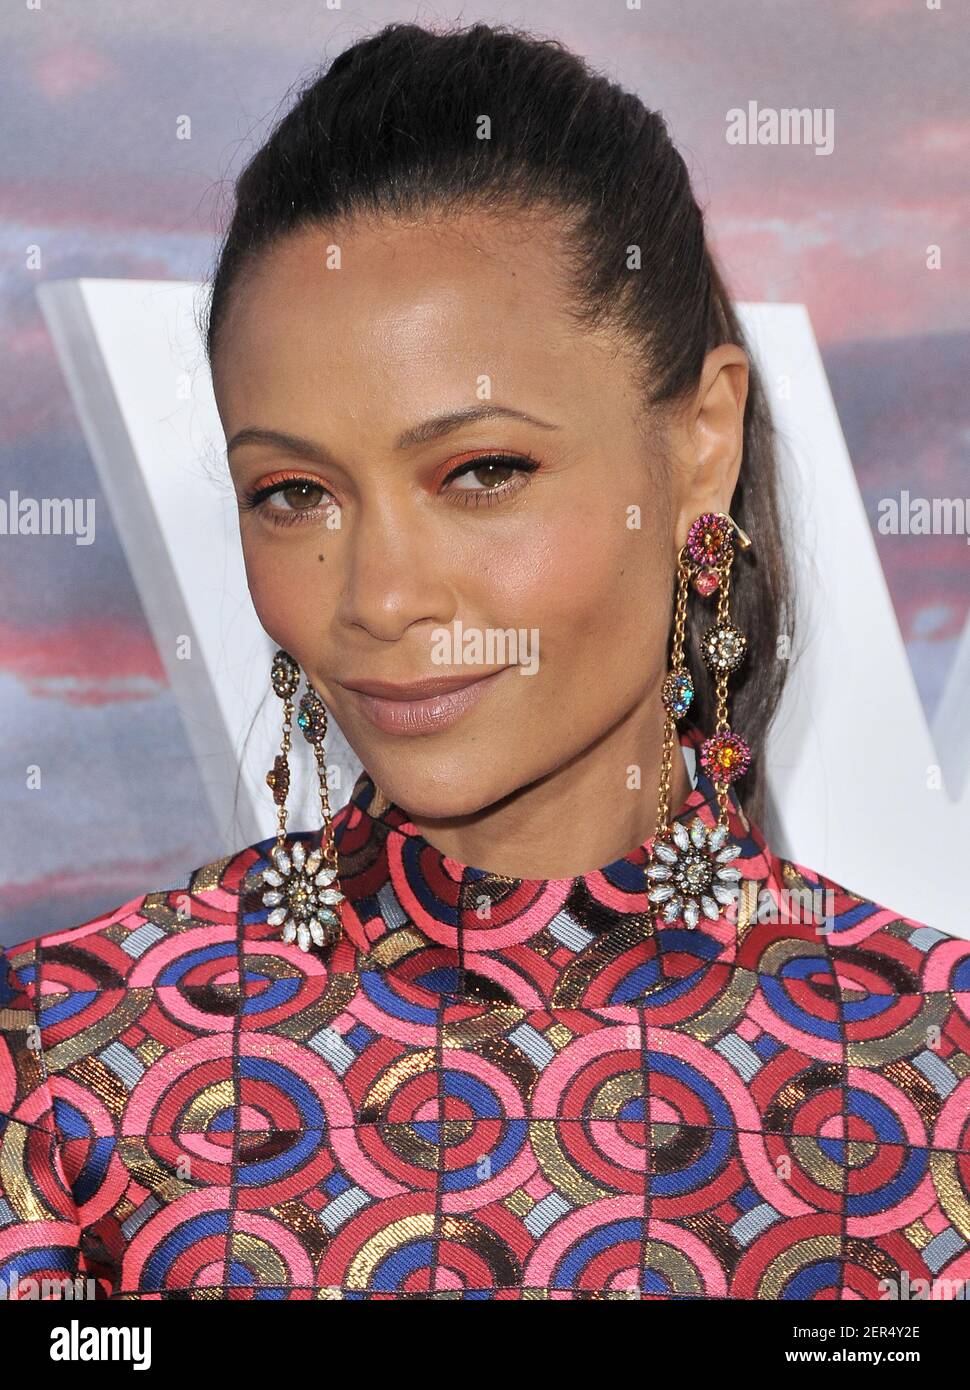 Thandie Newton Arrives At Hbo S Westworld Season 2 Los Angeles Premiere Held At The Cinerama Dome In Hollywood Ca On Monday April 16 18 Photo By Sthanlee B Mirador Sipa Usa Stock Photo Alamy